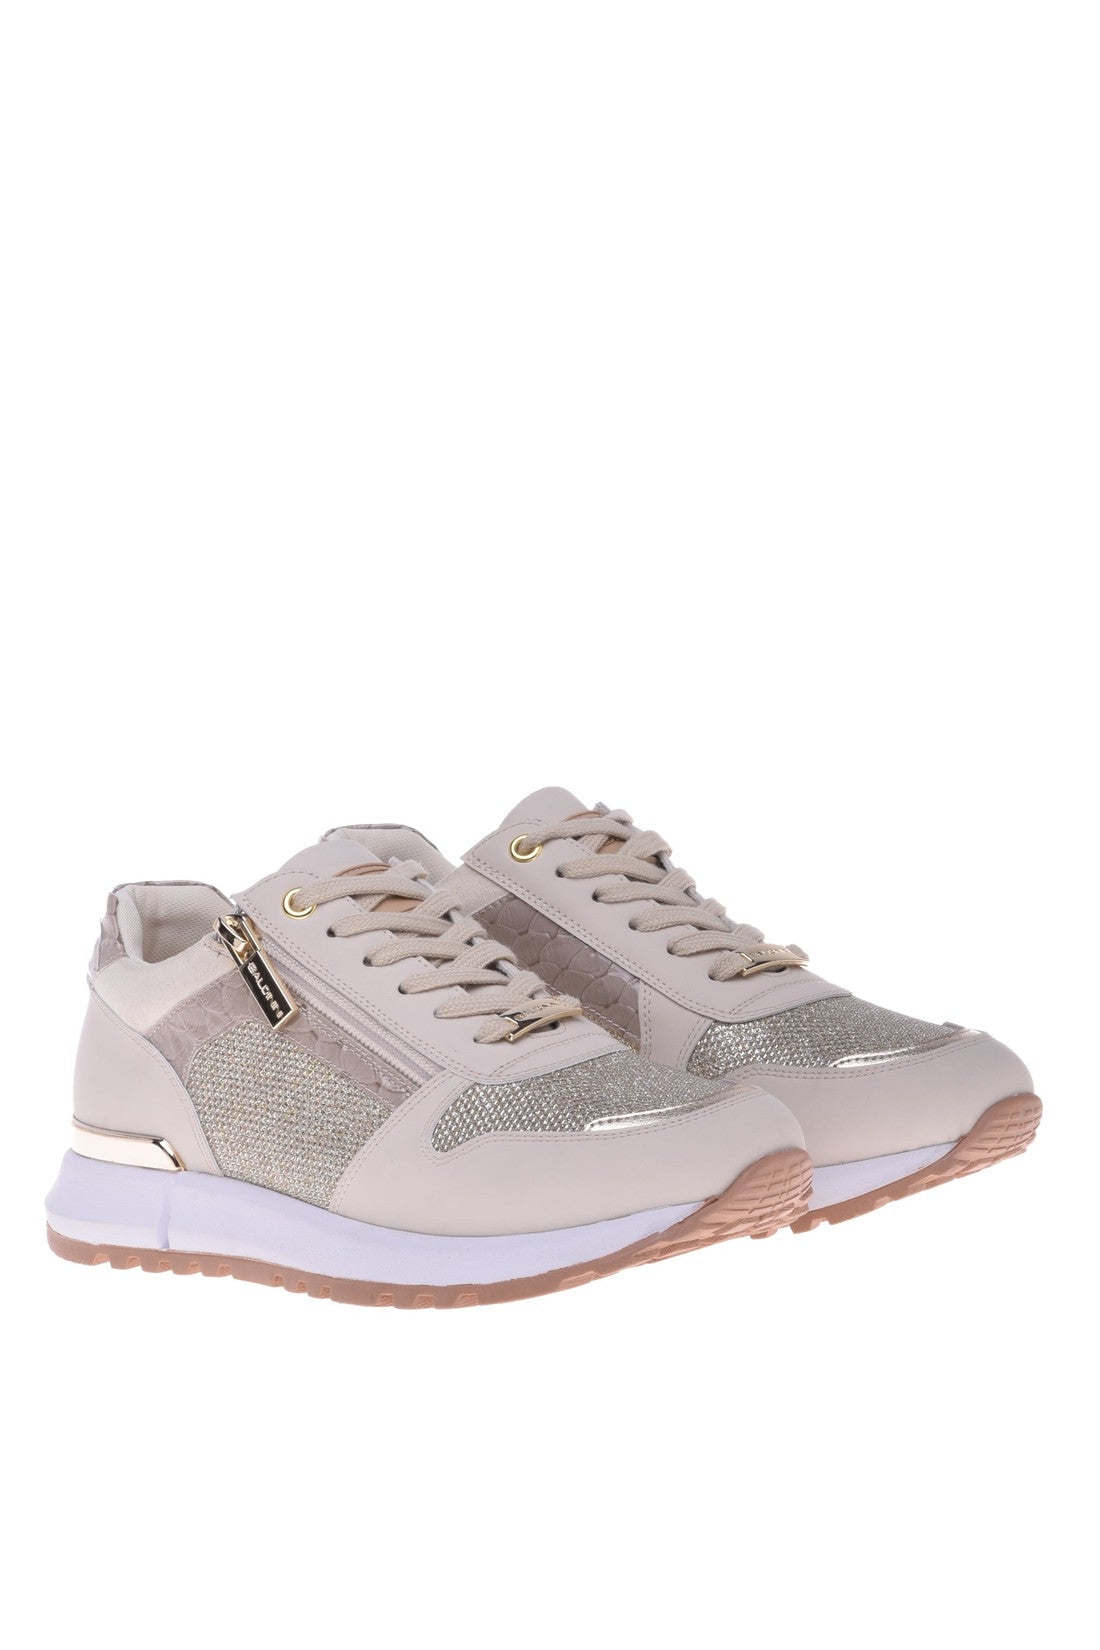 BALDININI-OUTLET-SALE-Sneaker-in-beige-and-platinum-nappa-leather-and-fabric-Sneaker-ARCHIVE-COLLECTION-3.jpg